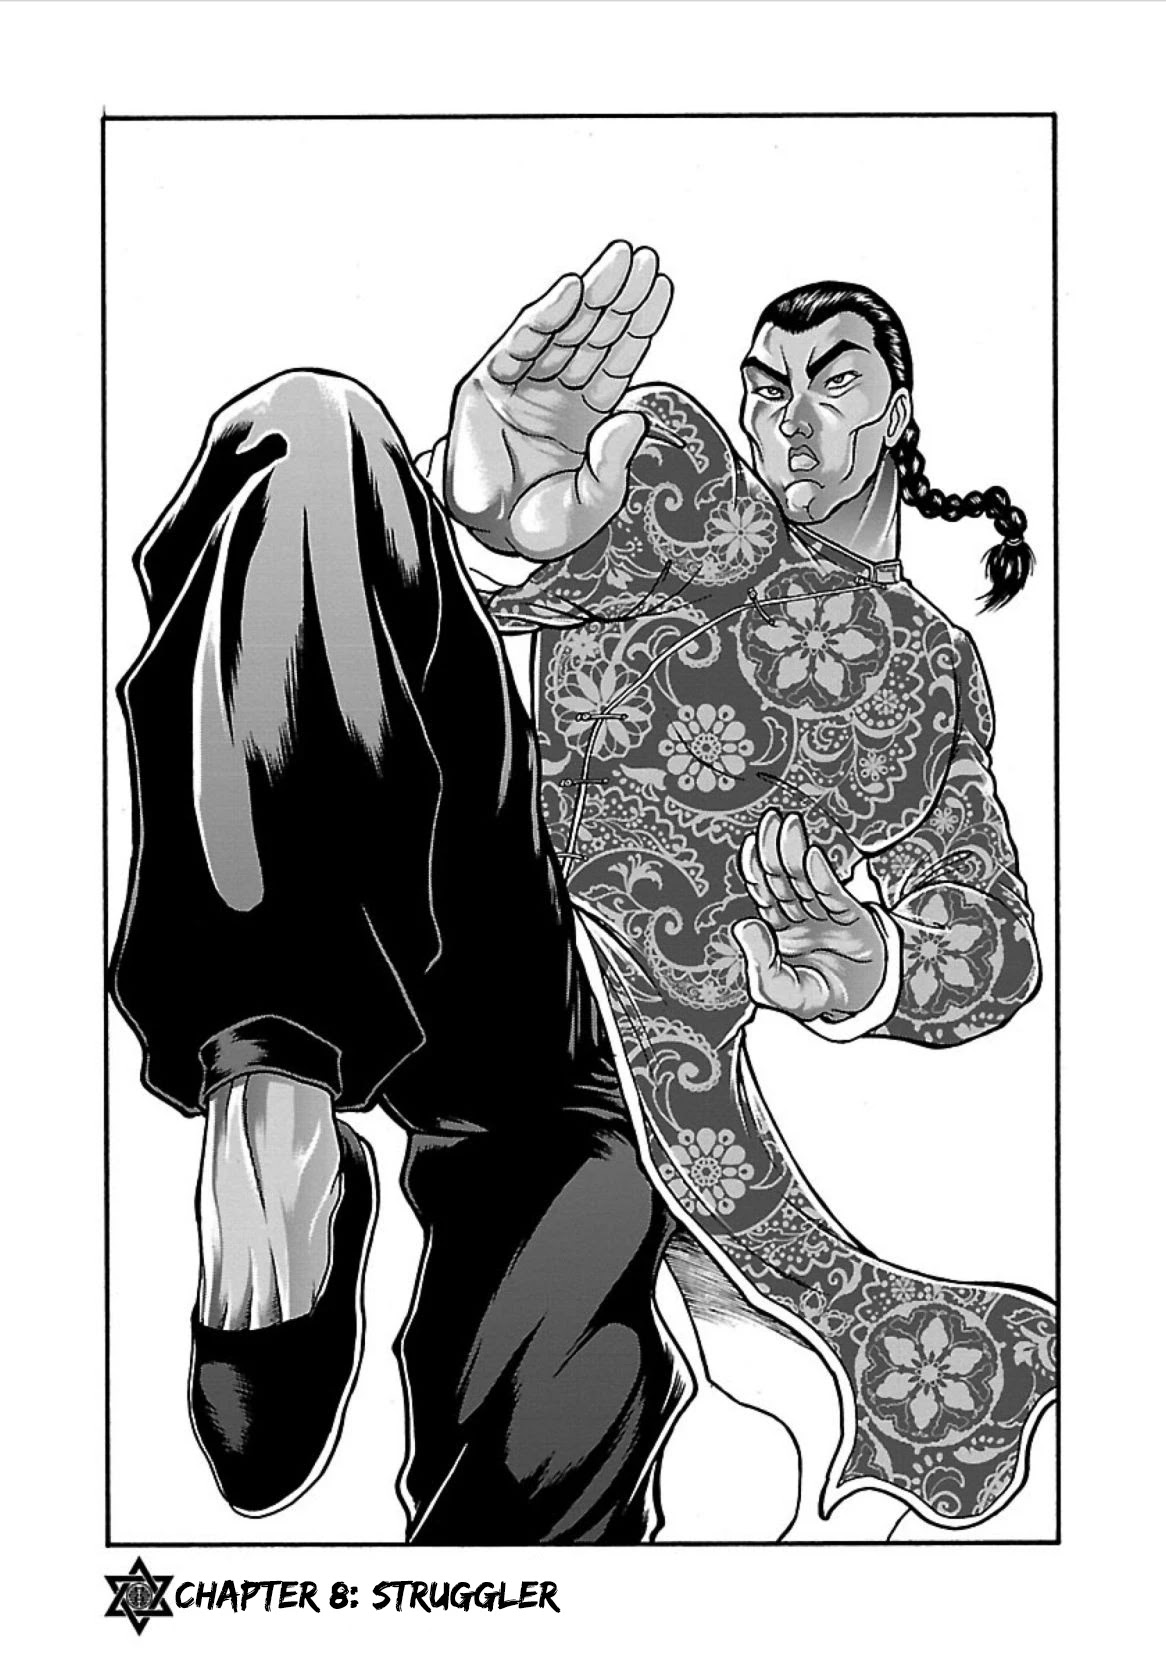 Baki Side Story - Retsu Kaioh Doesn't Mind Even If It's In Another World Chapter 8: Struggler - Picture 1